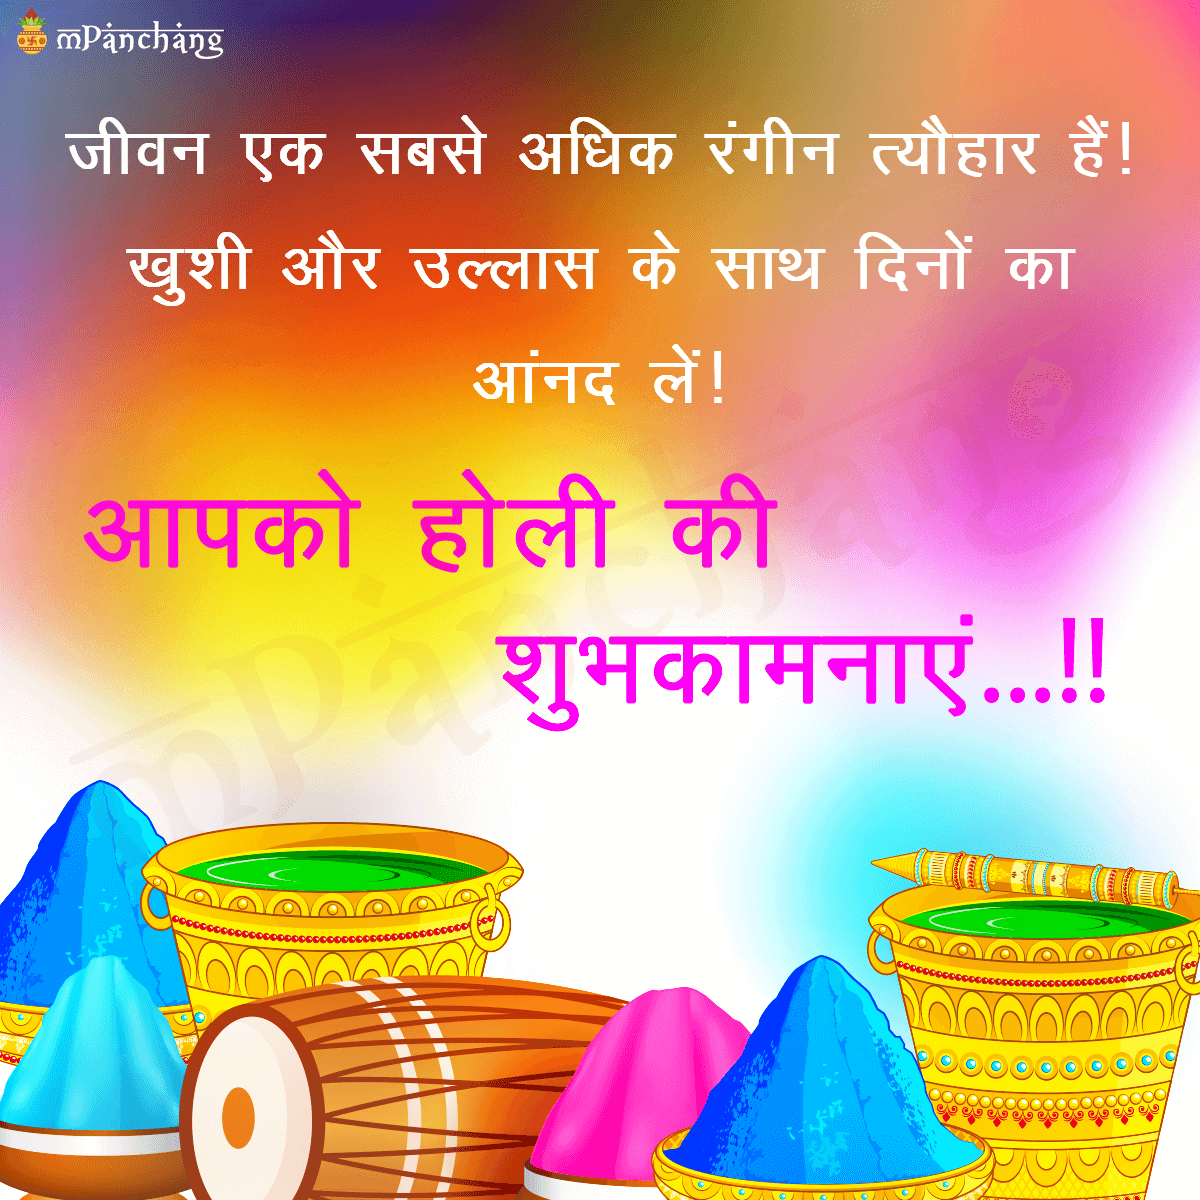 Happy Holi Wishes SMS greetings for WhatsApp, Facebook in hindi